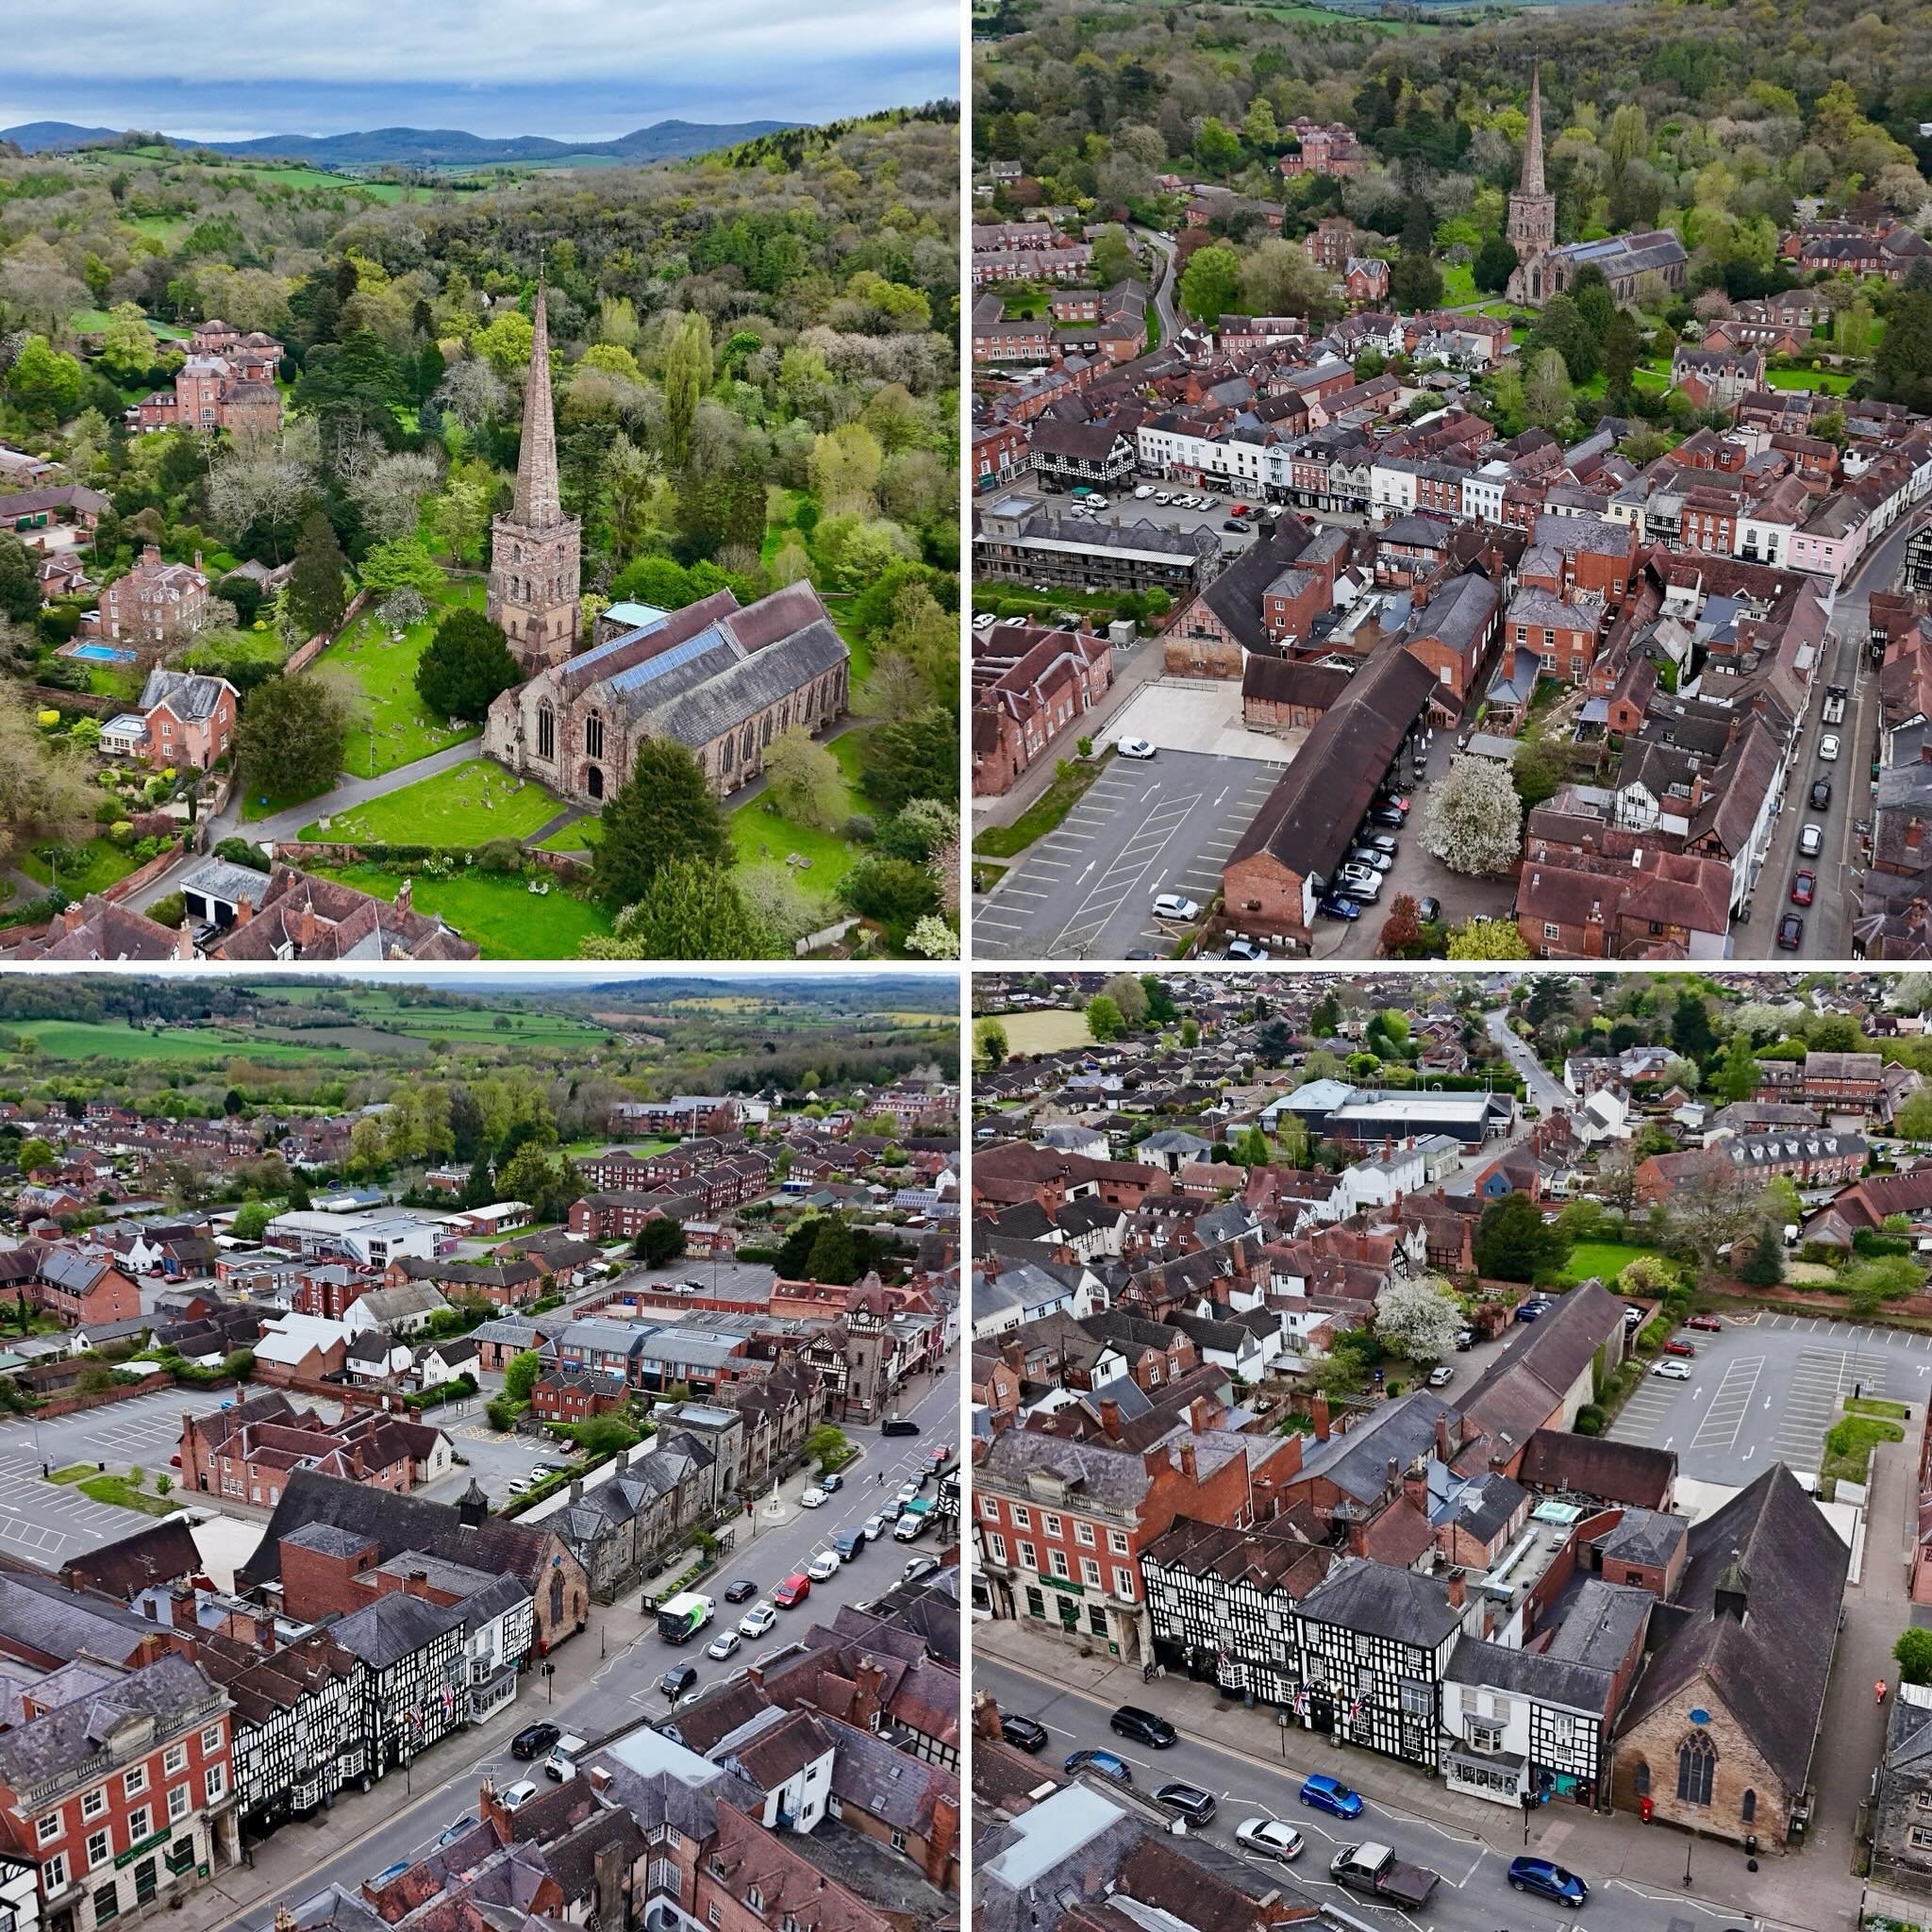 Today we are in the lovey town of Ledbury in Herefordshire. 🎥🎬

#thedroneman  #kurniaaerialphotography #DroneProduction #AerialProduction #DroneVideography #AerialFilming #DroneFilming  #DroneServices #DroneAdvertising #DroneMarketing #AerialMarket